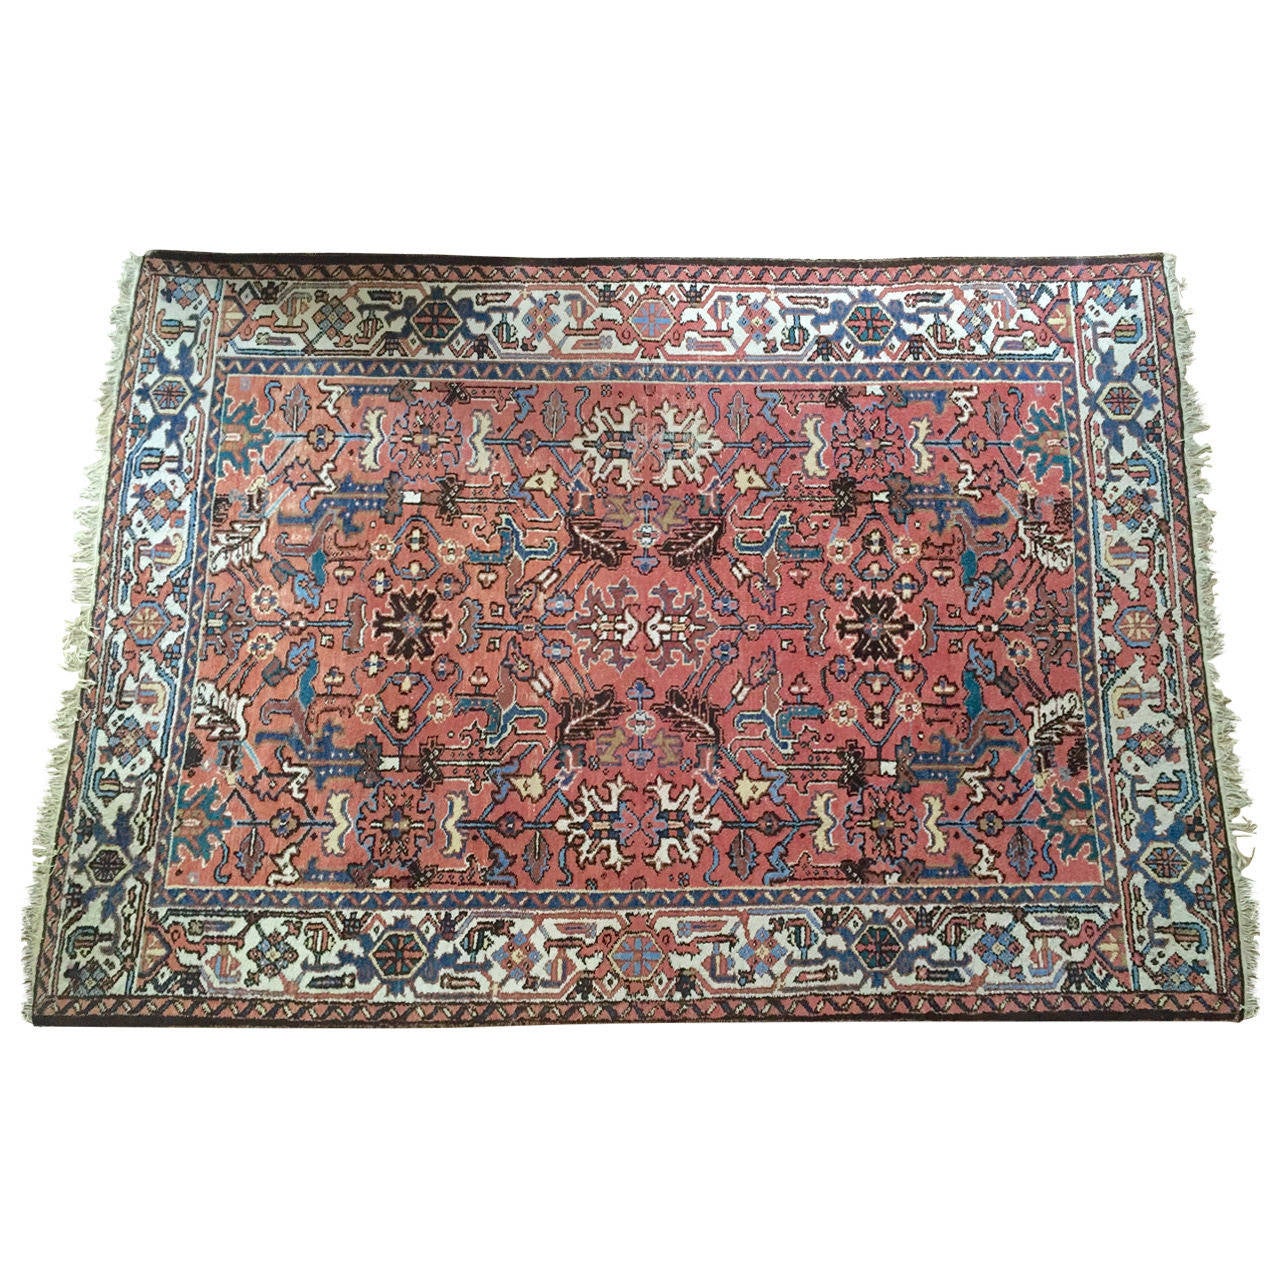 Lovely Semi-Antique Peach Color Persian Carpet at 1stdibs